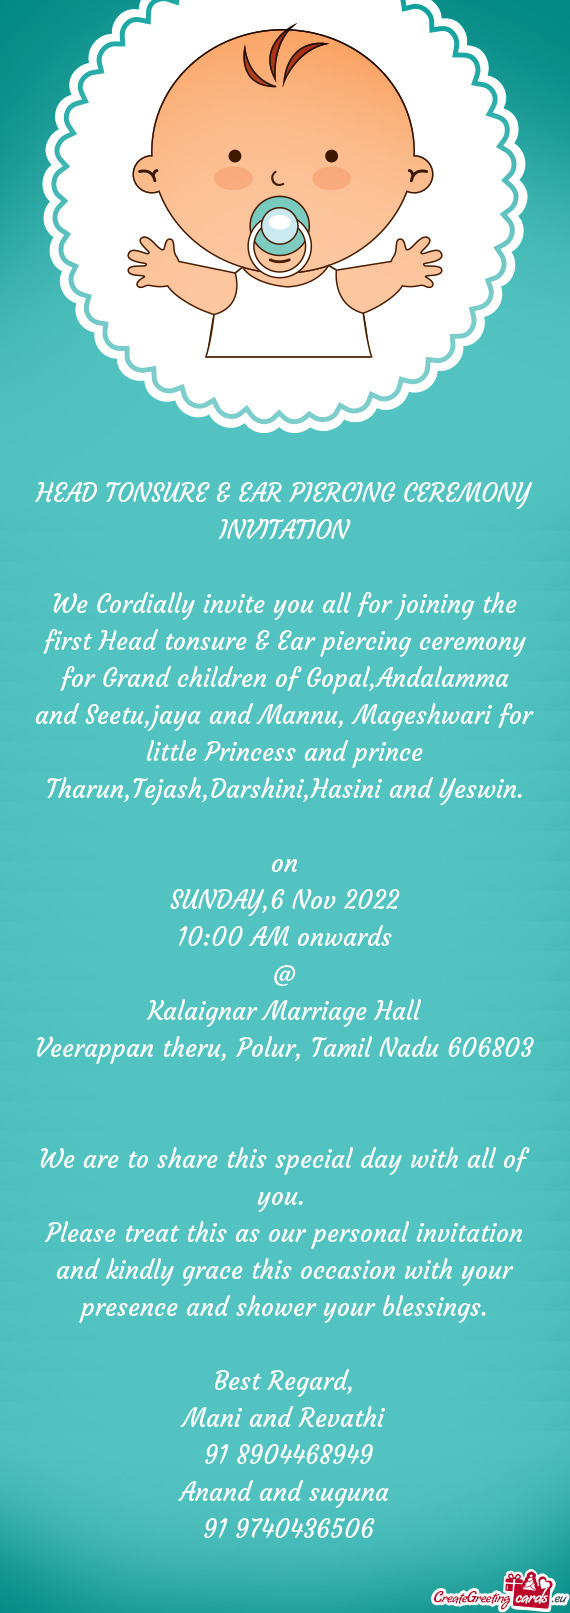 We Cordially invite you all for joining the first Head tonsure & Ear piercing ceremony for Grand chi